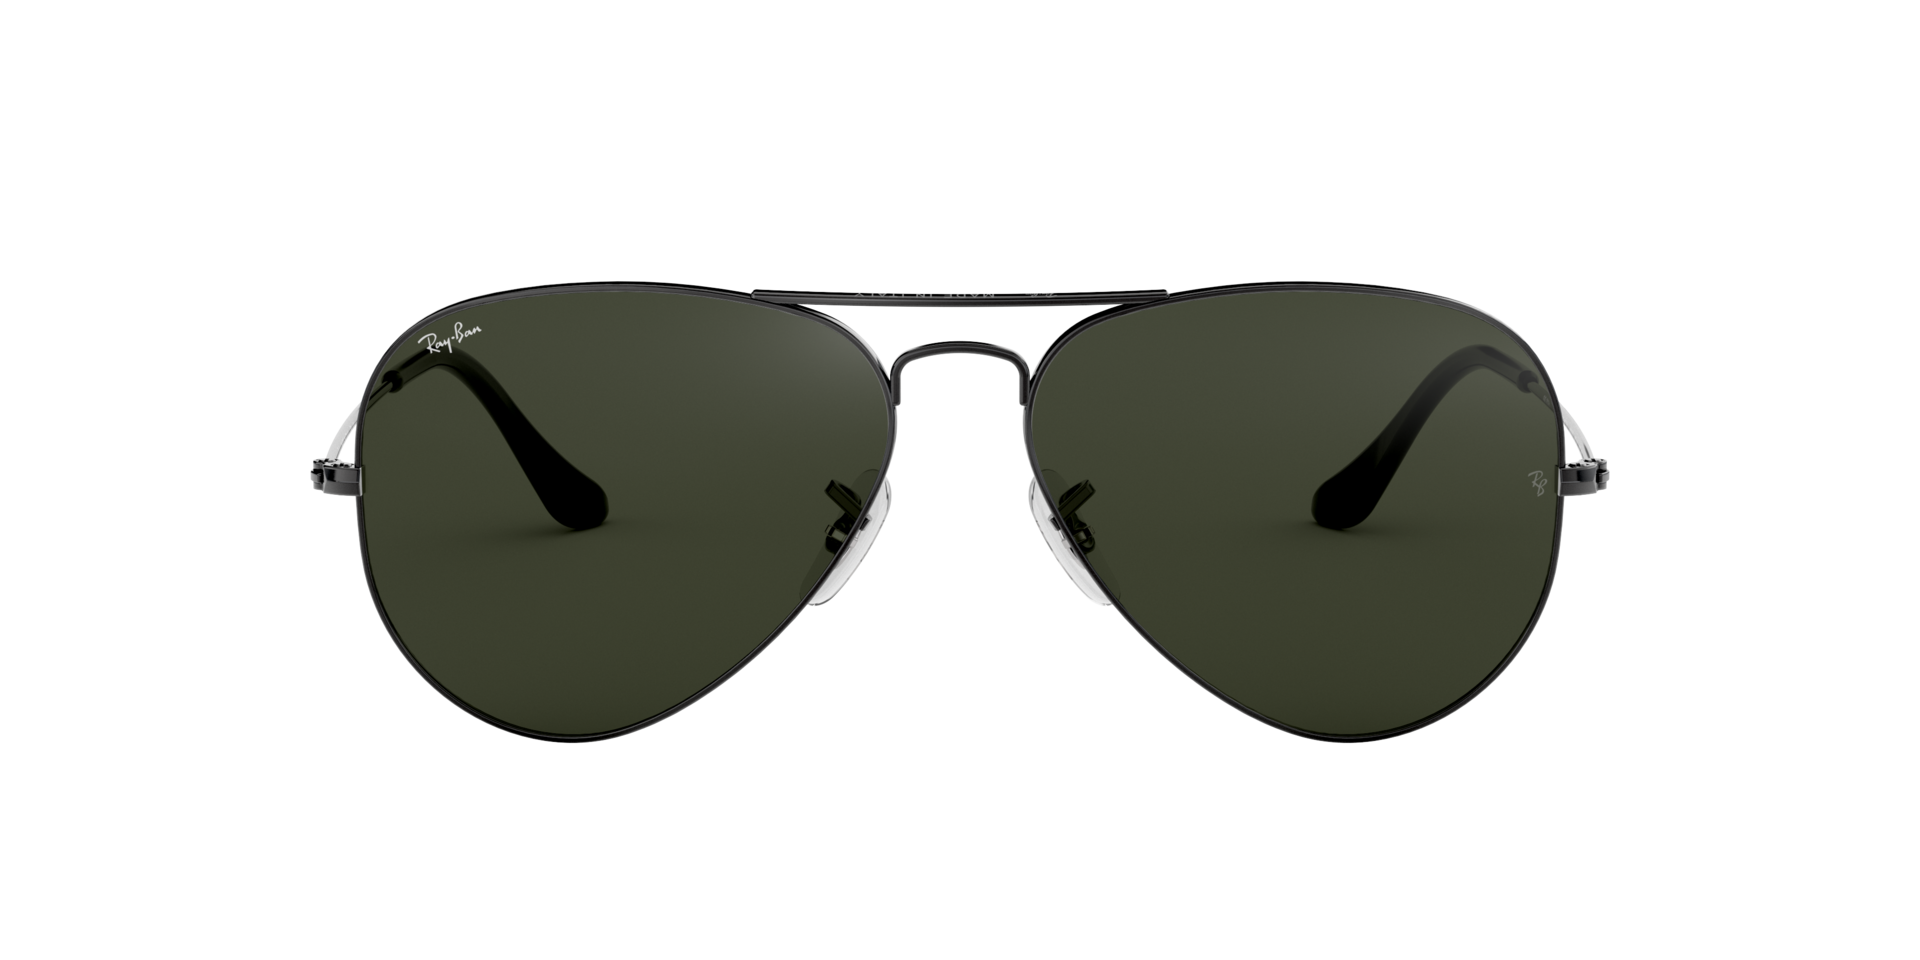 Ray-Ban Aviator Classic Sunglasses RB3025 L0205 - Polished Gold Frame - Green Classic G-15 Lenses - 58mm